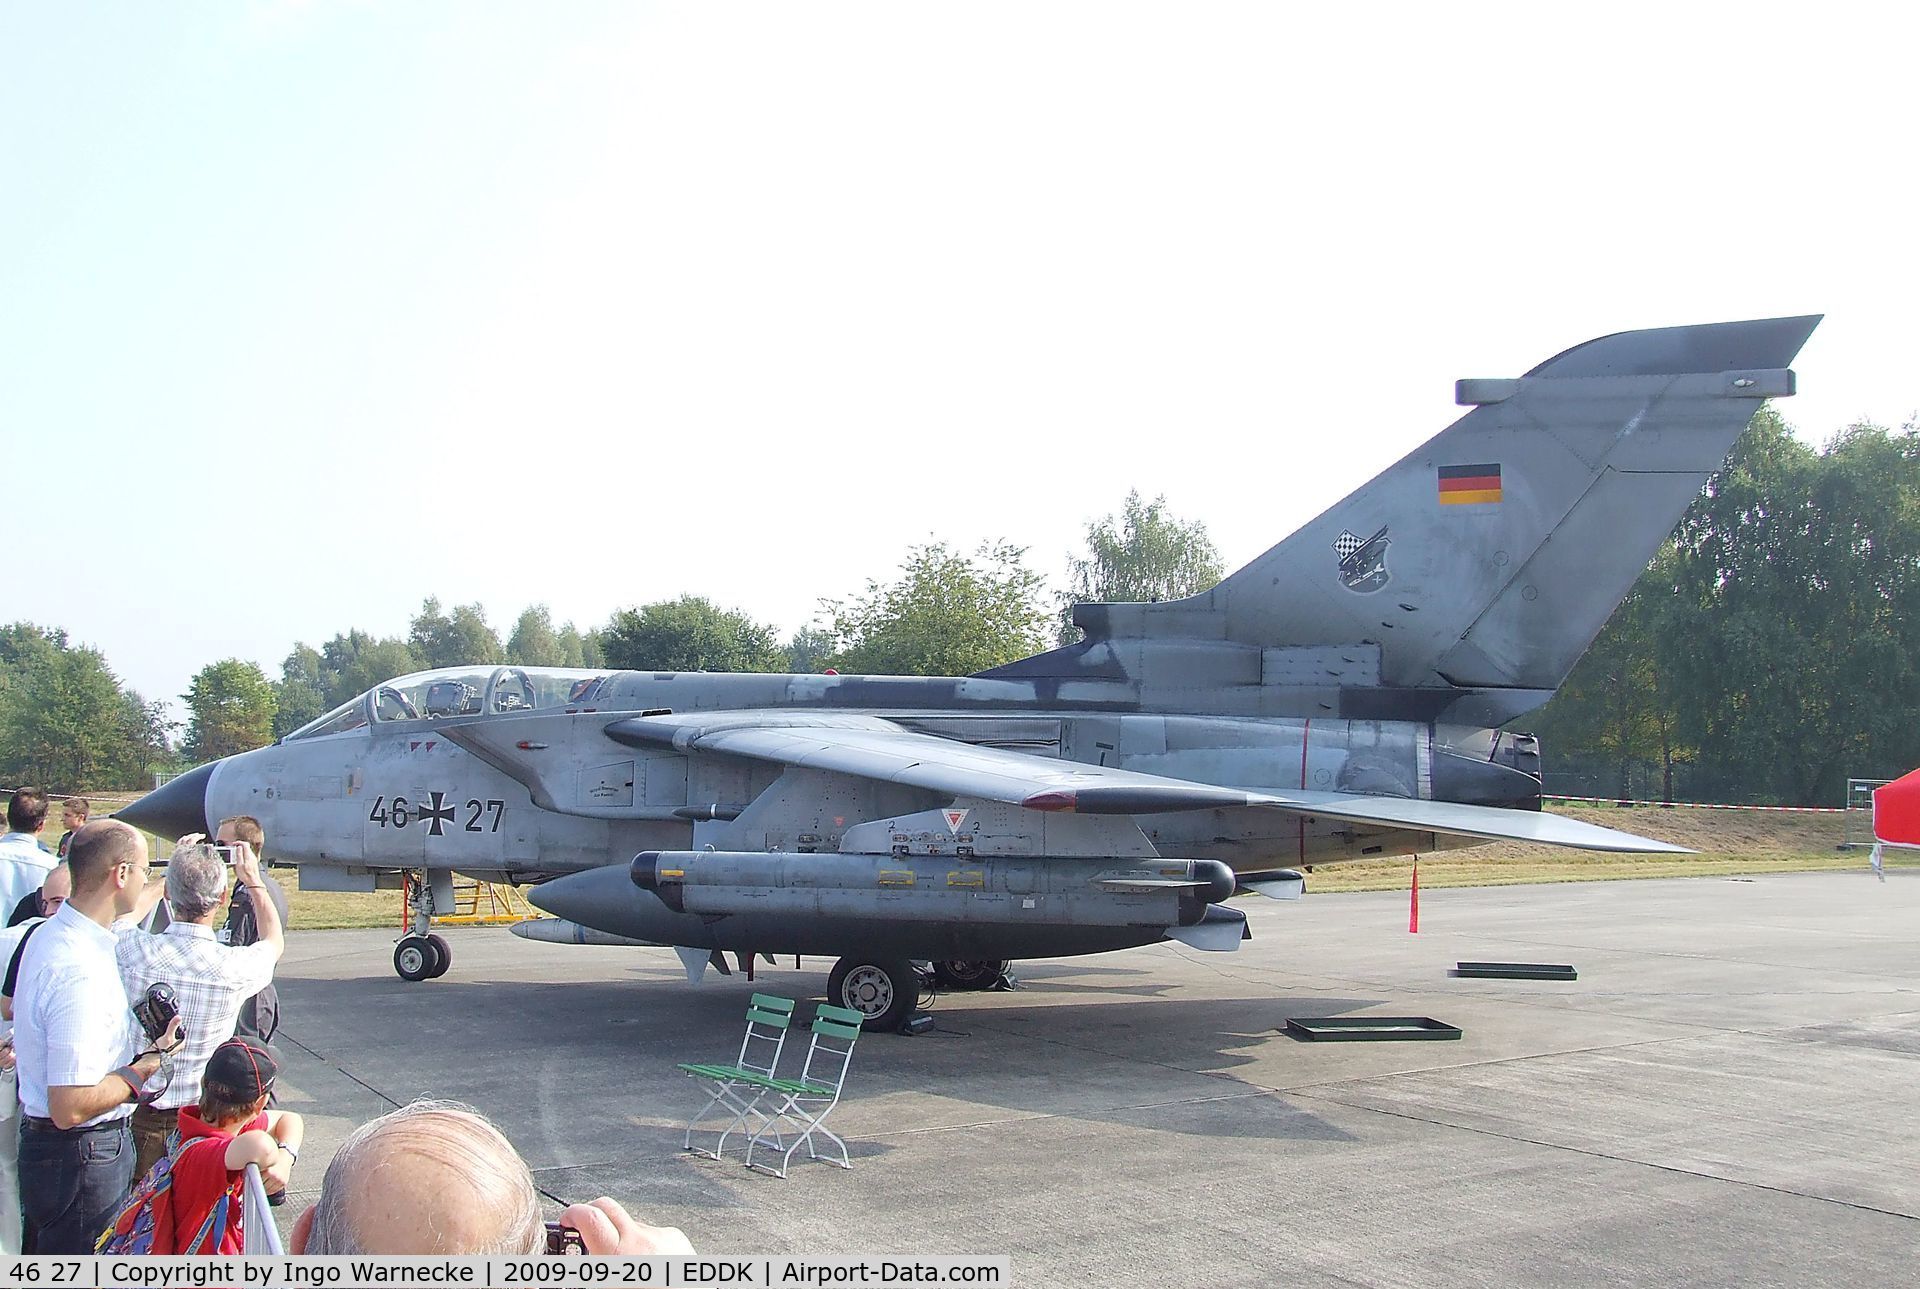 46 27, Panavia Tornado ECR C/N 827/GS260/4327, Panavia Tornado ECR of Luftwaffe (German Air Force) at the DLR 2009 air and space day on the side of Cologne airport